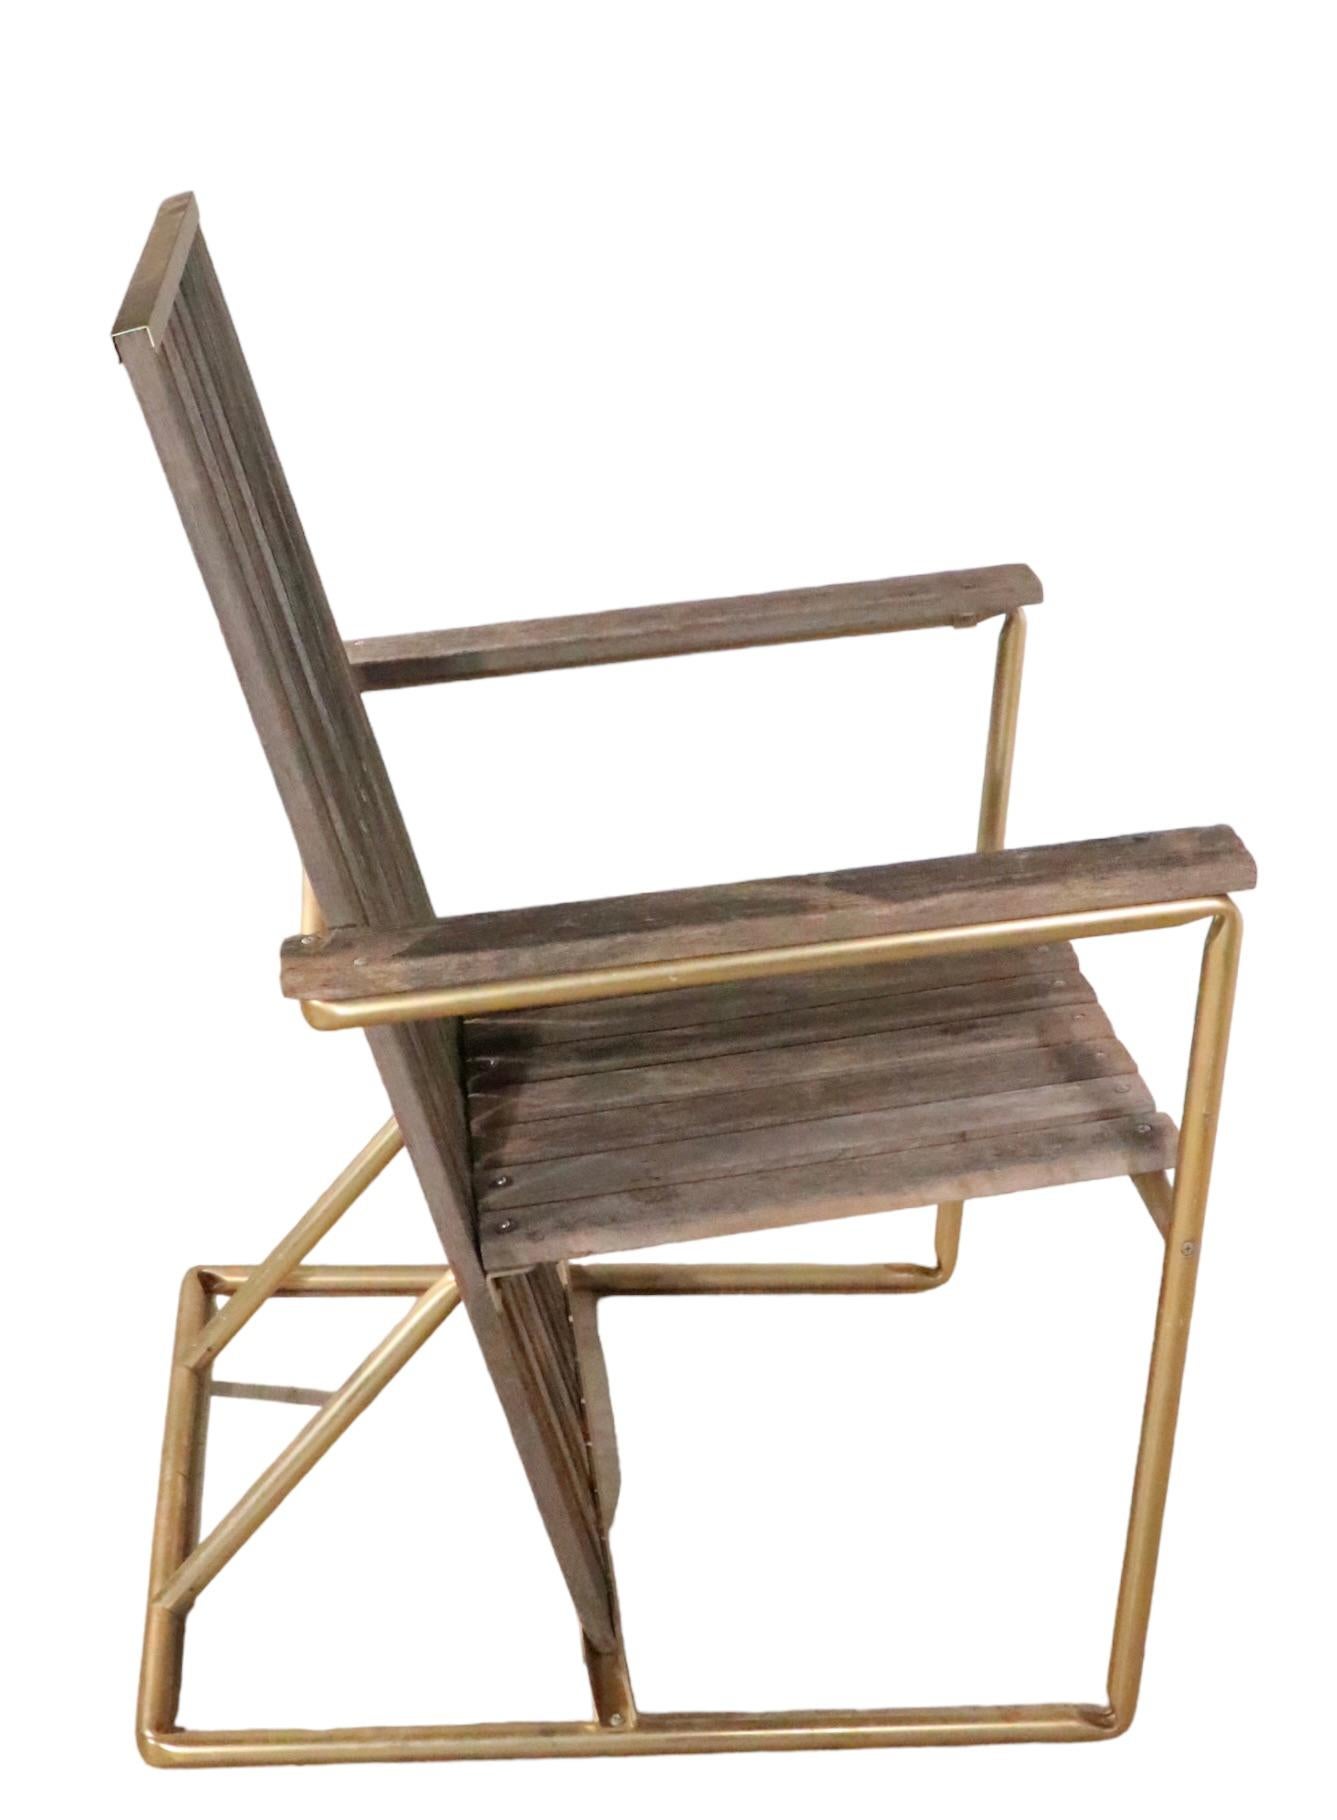 Chic architectural vintage 1970's lounge chair, having repeating wood planks, with an anodized aluminum gold tone frame. Design reminiscent of the classic De Stijl School, by Gerrit Rievtveld in an update casual modernist style. 
 The wood slats are